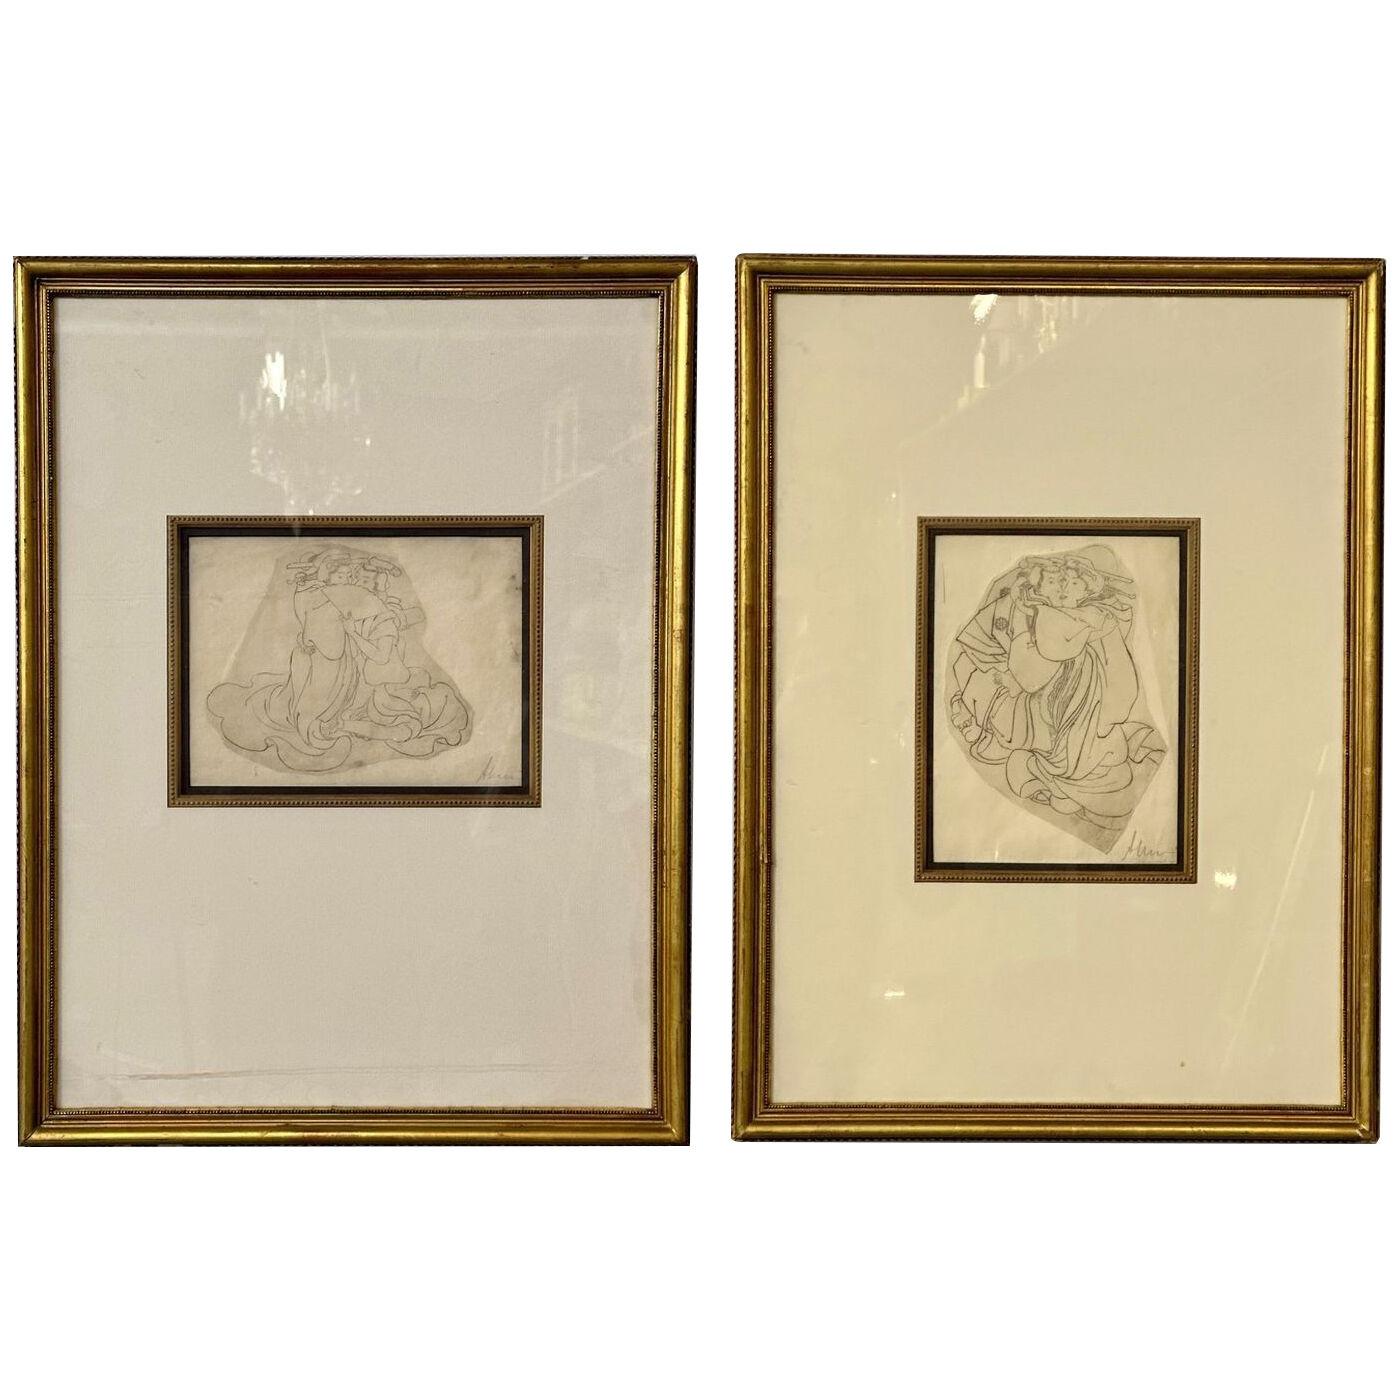 Pair of 19th C. Oriental Shunga Drawings, 'Loving Couple' Signed & Dated